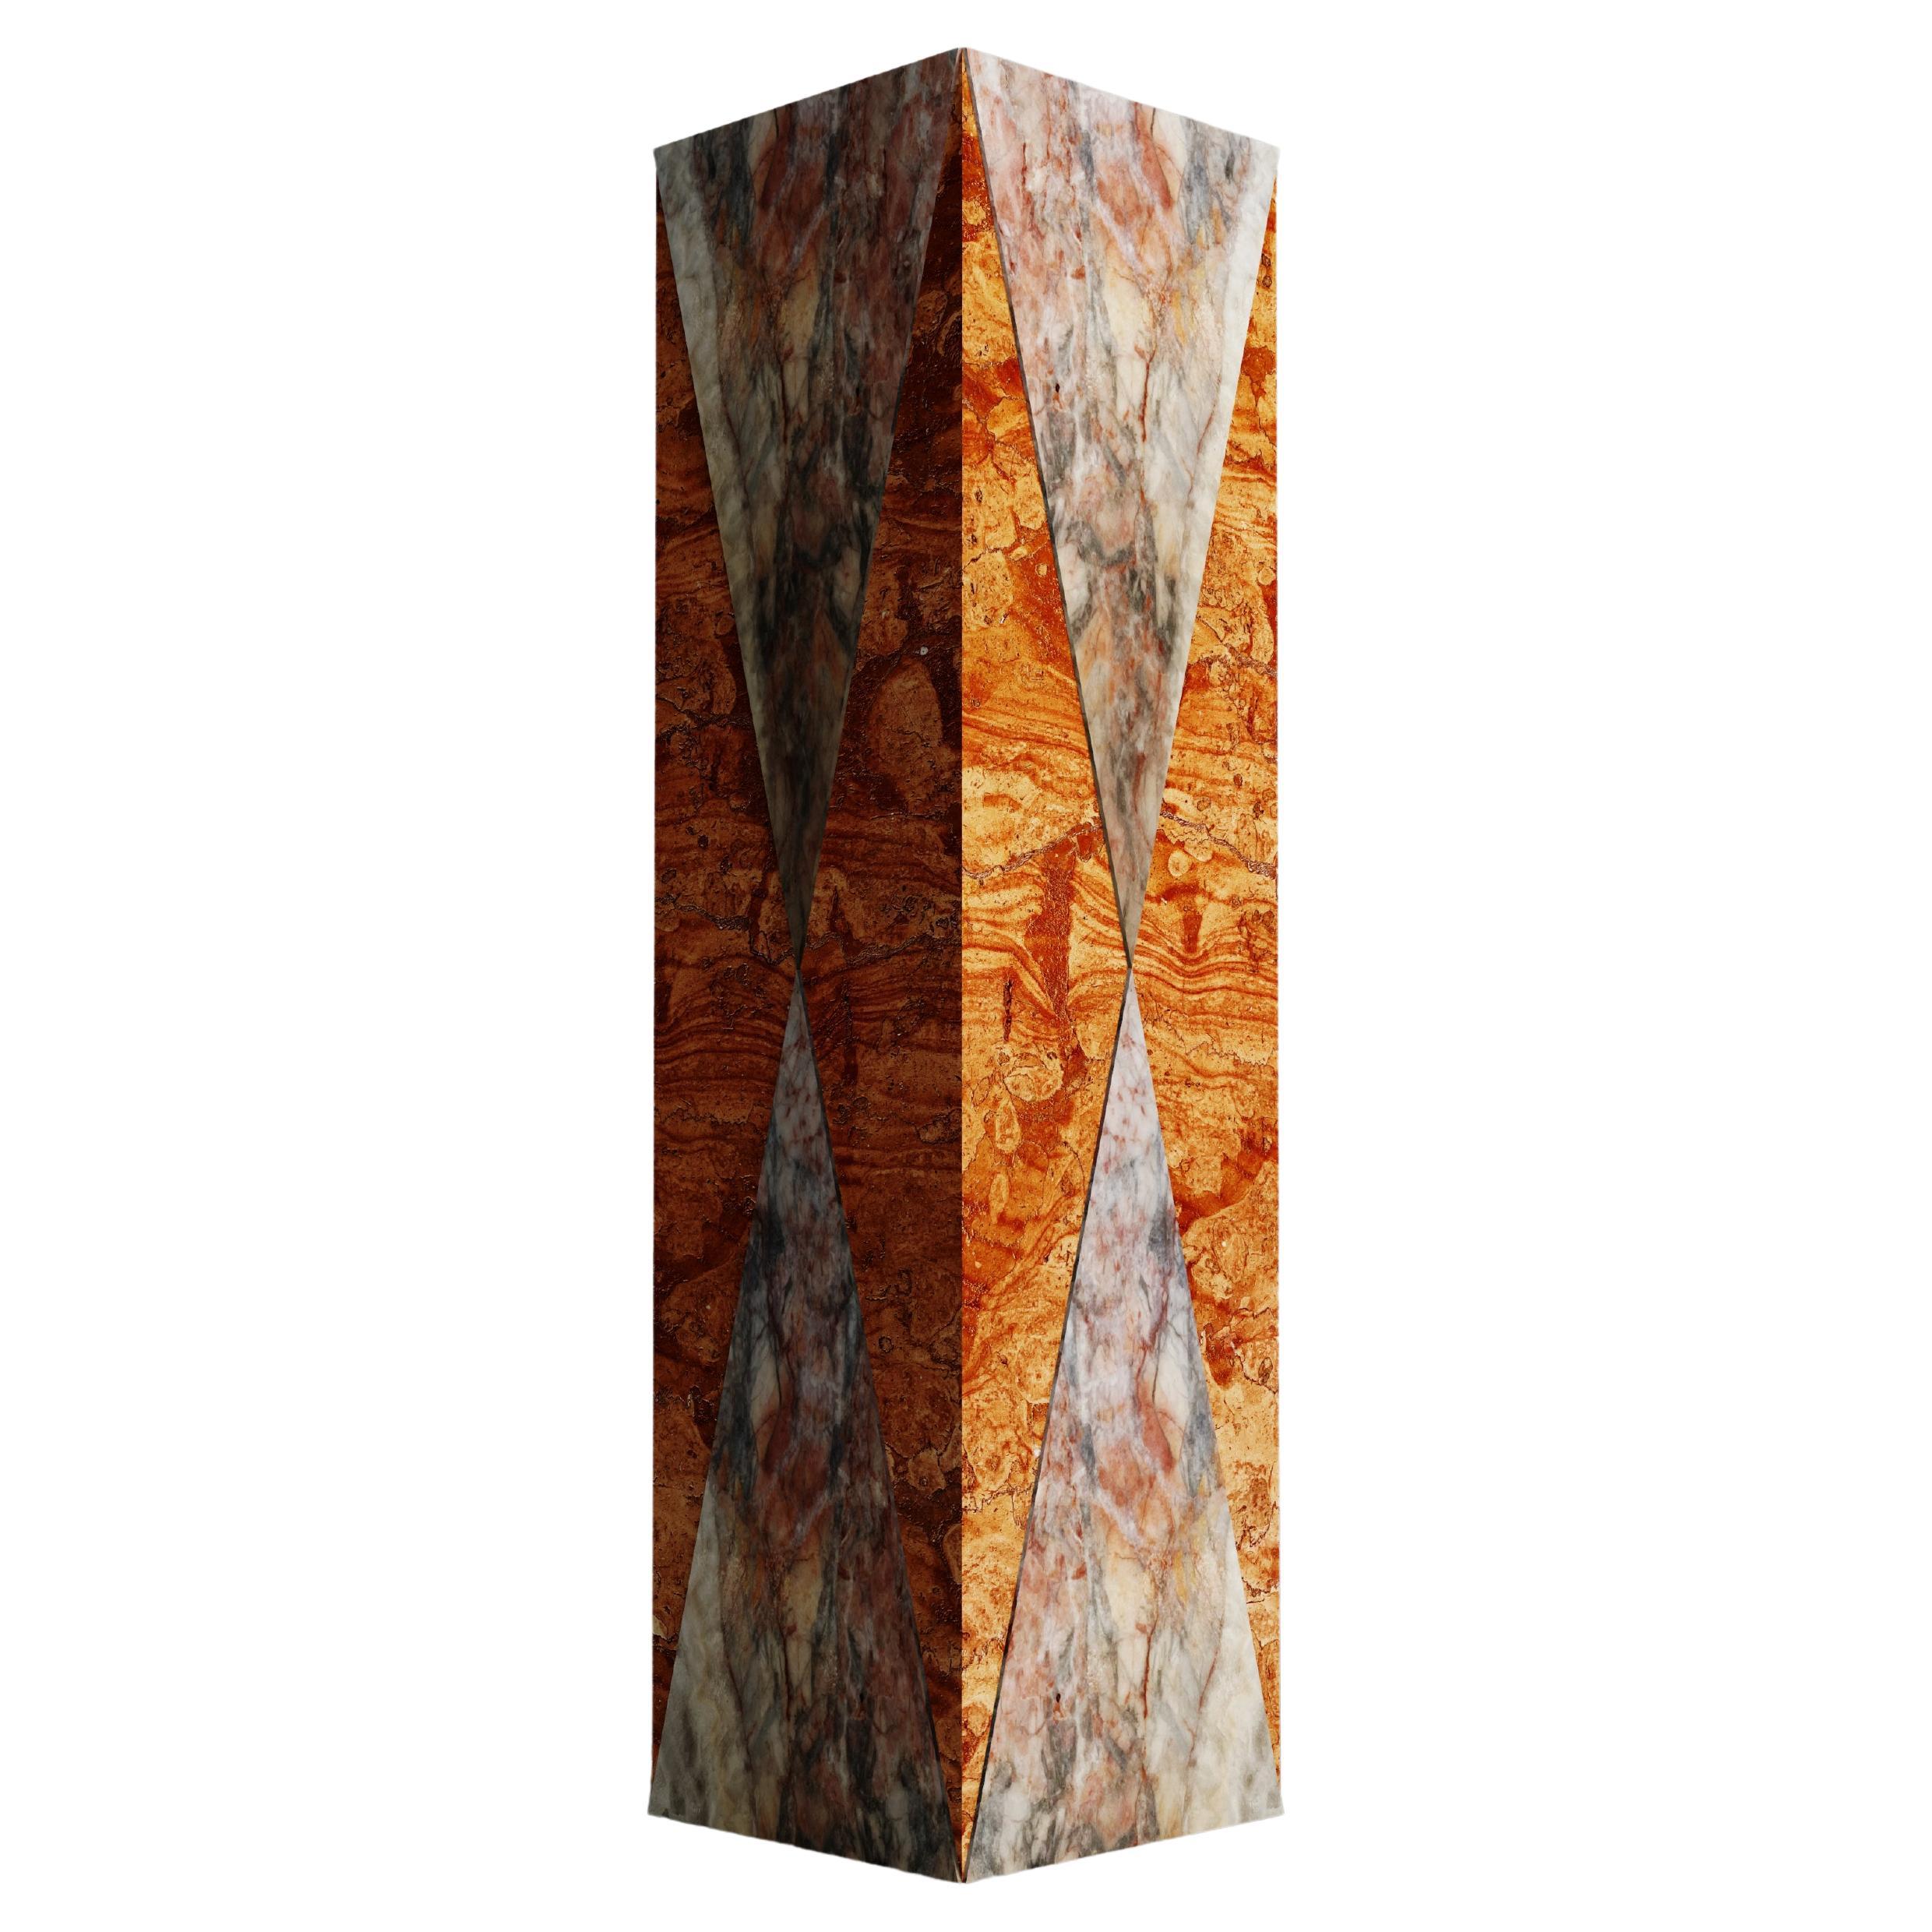 Triangular vase in Asiago Red Marble and Fior di Pesco Carnico For Sale